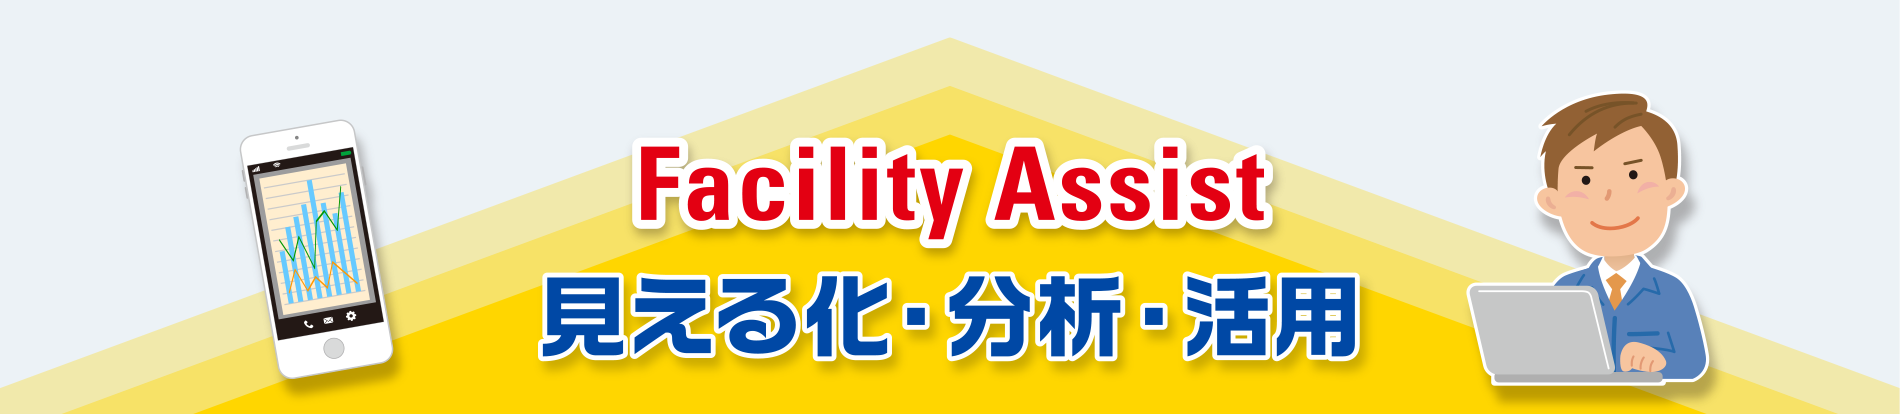 Facility Assist 見える化・分析・活用